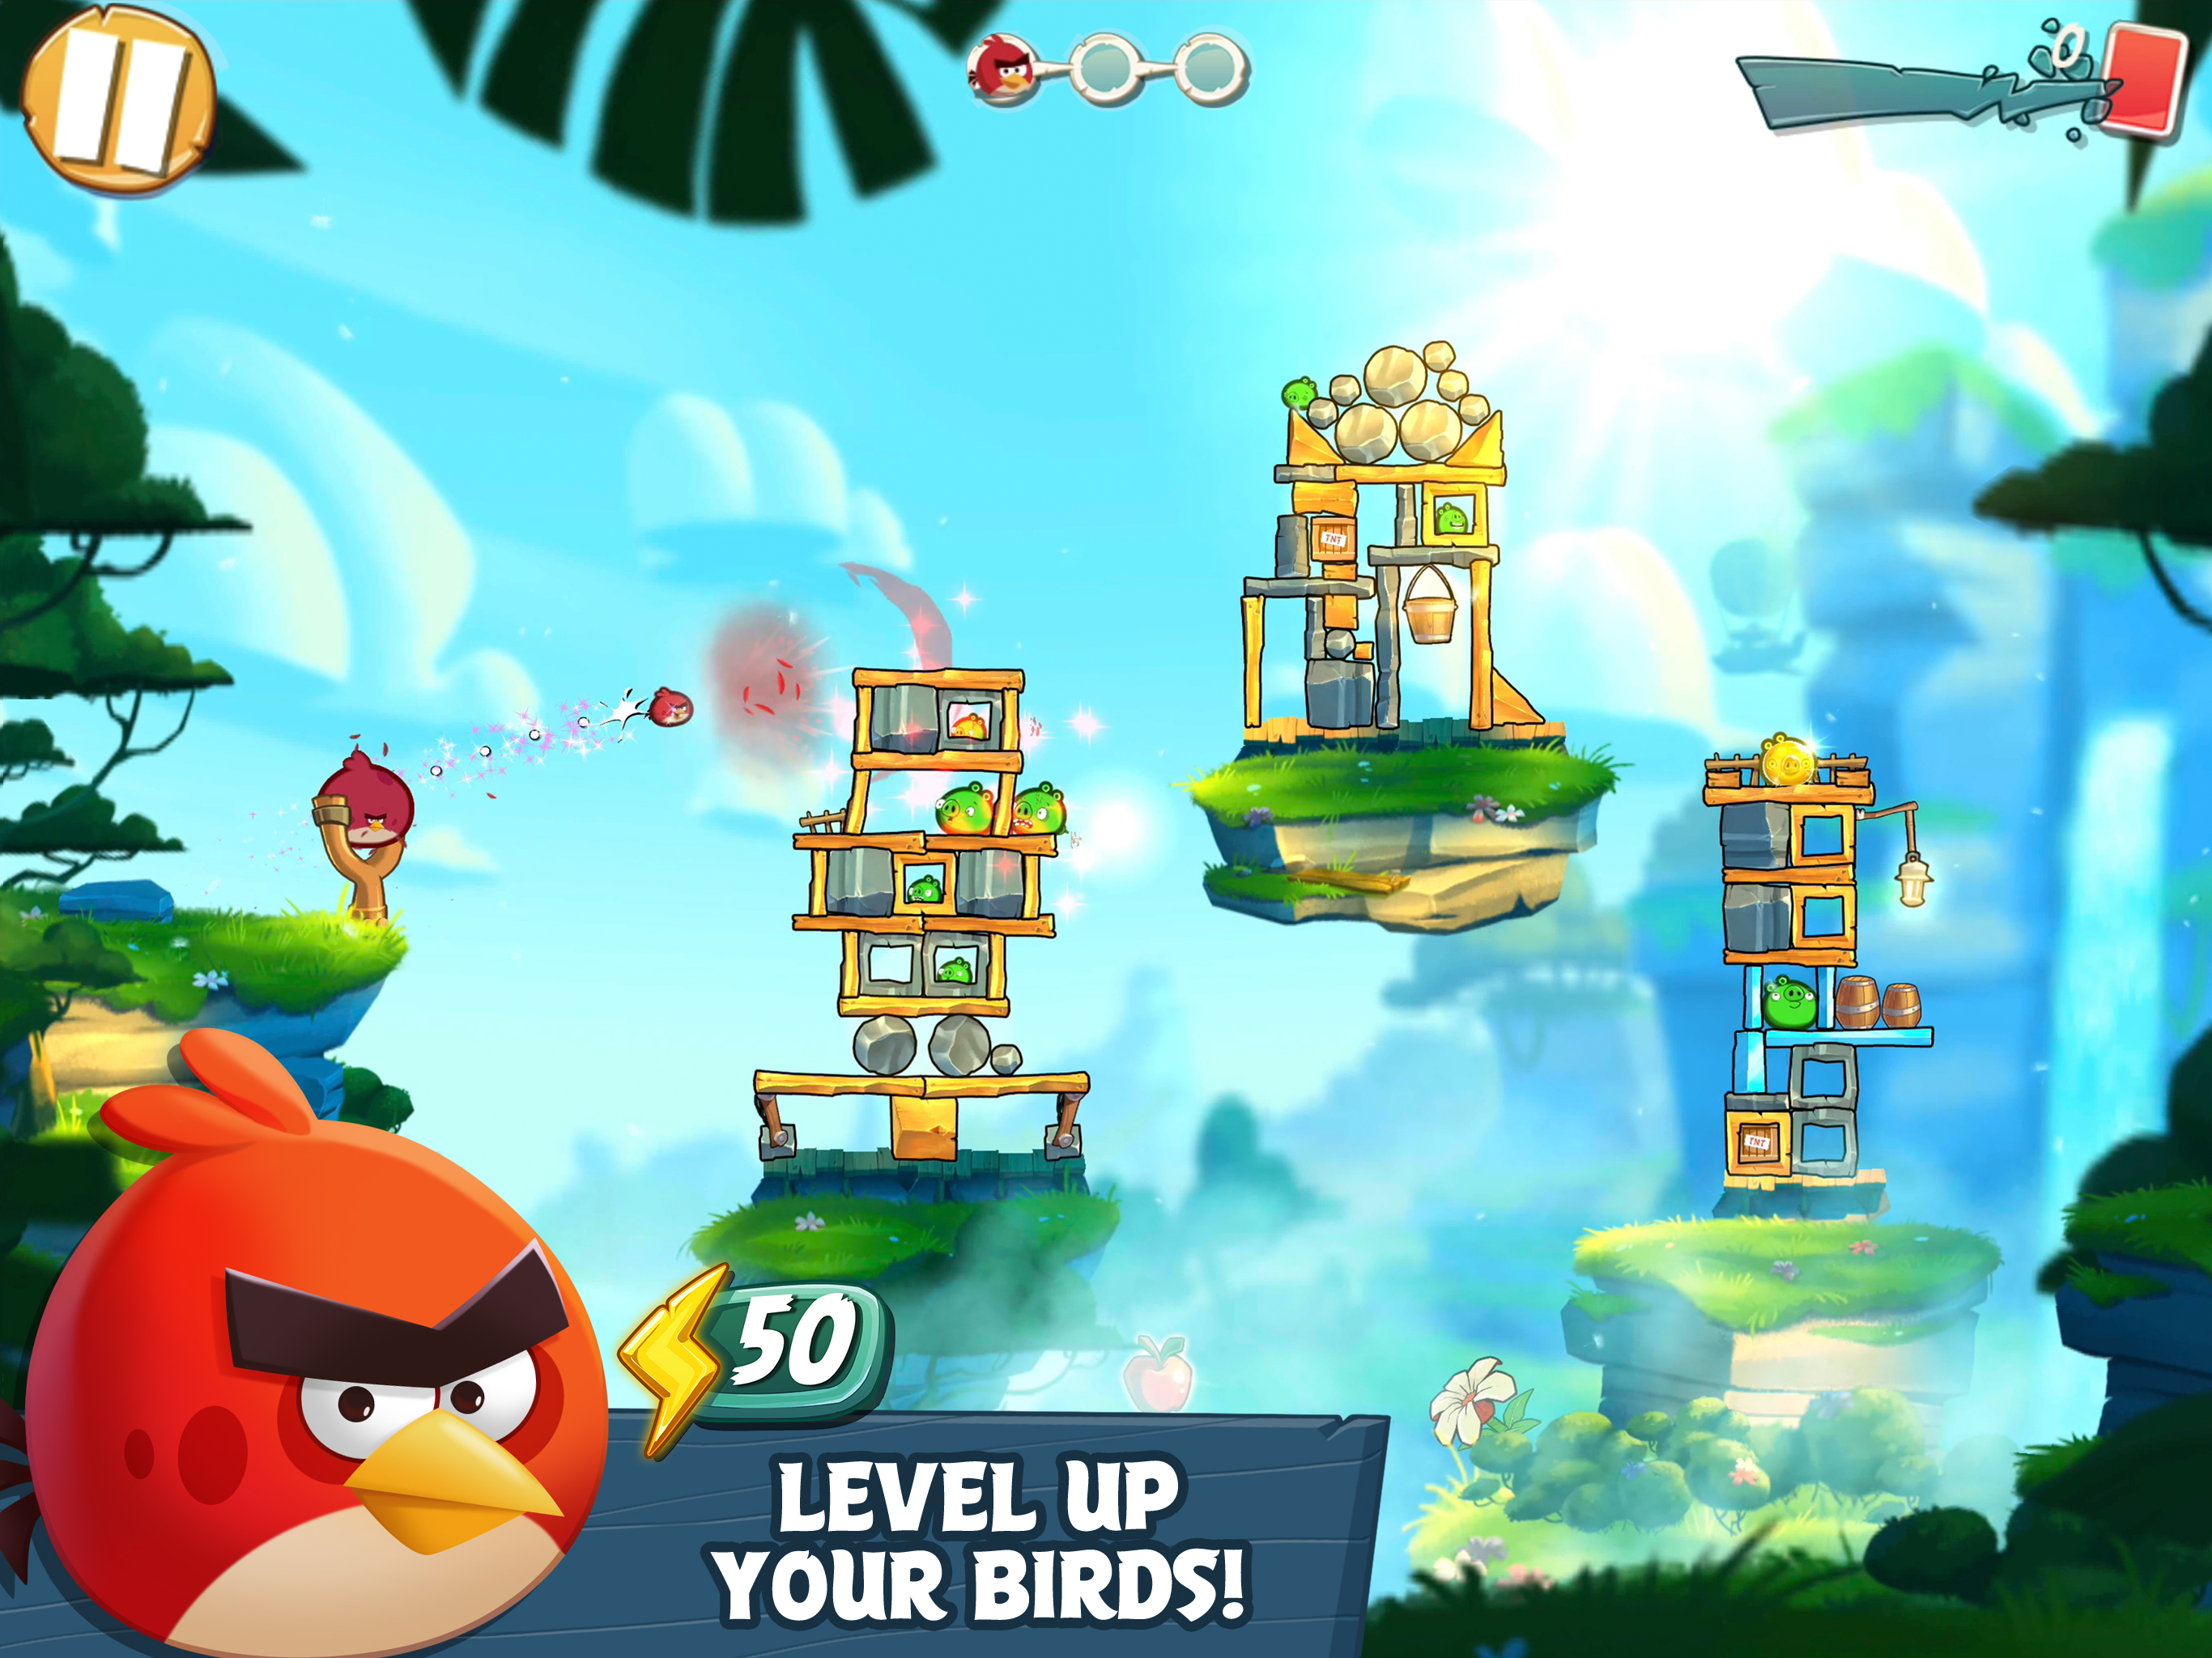 Download & Play Angry Birds on PC & Mac (Emulator)